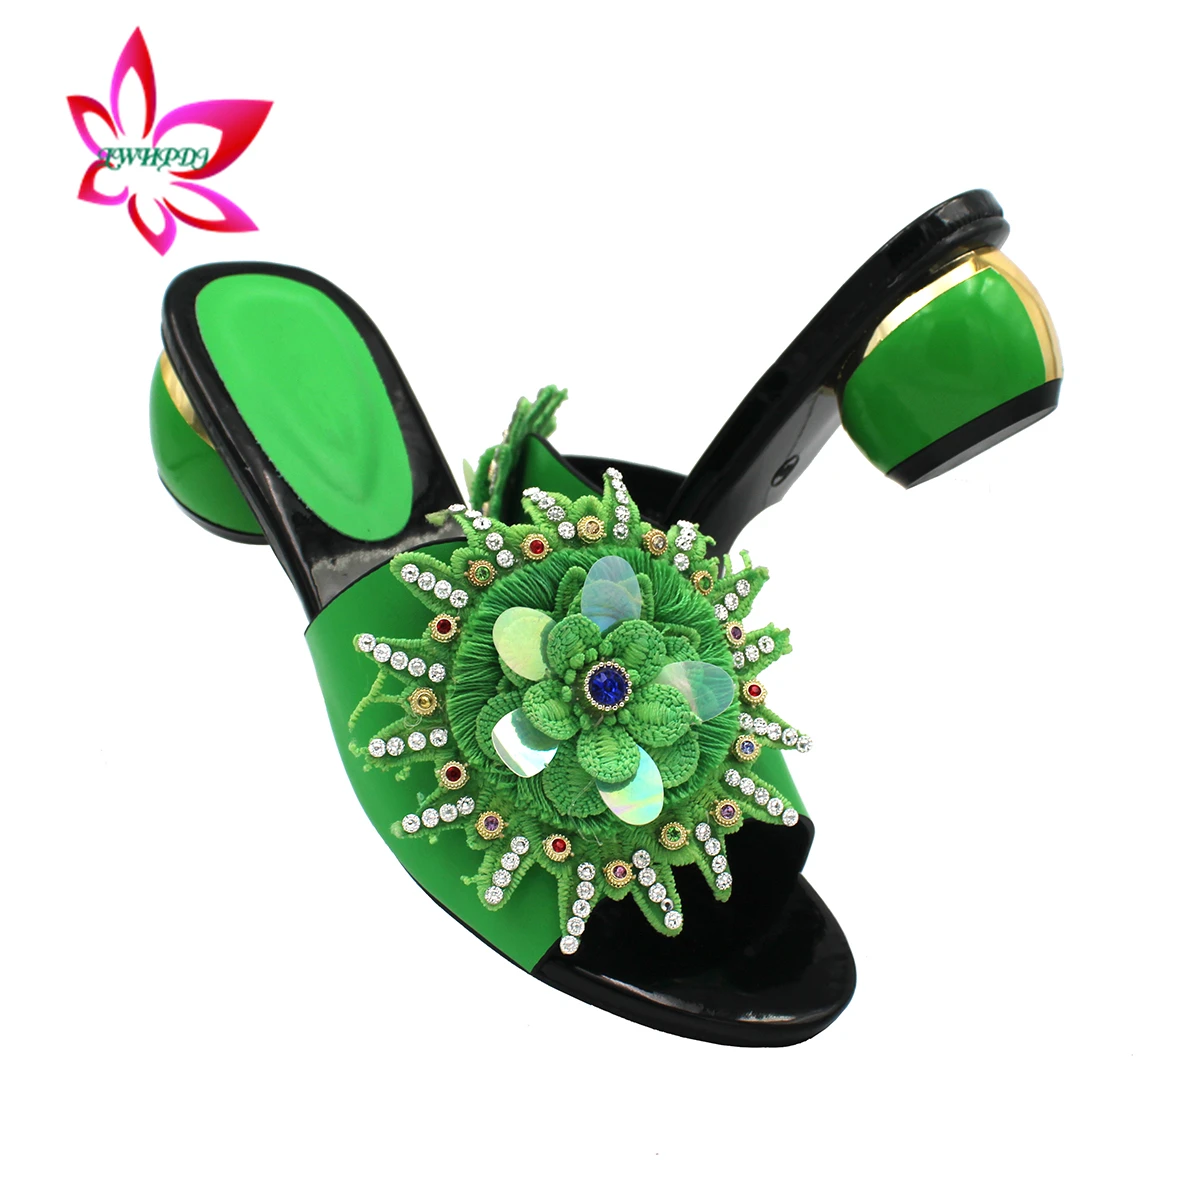 

2021 Autumn New Arrivals Slingbacks Slipper in Light Green Color High Quality Sexy African Women Shoes for Garden Party